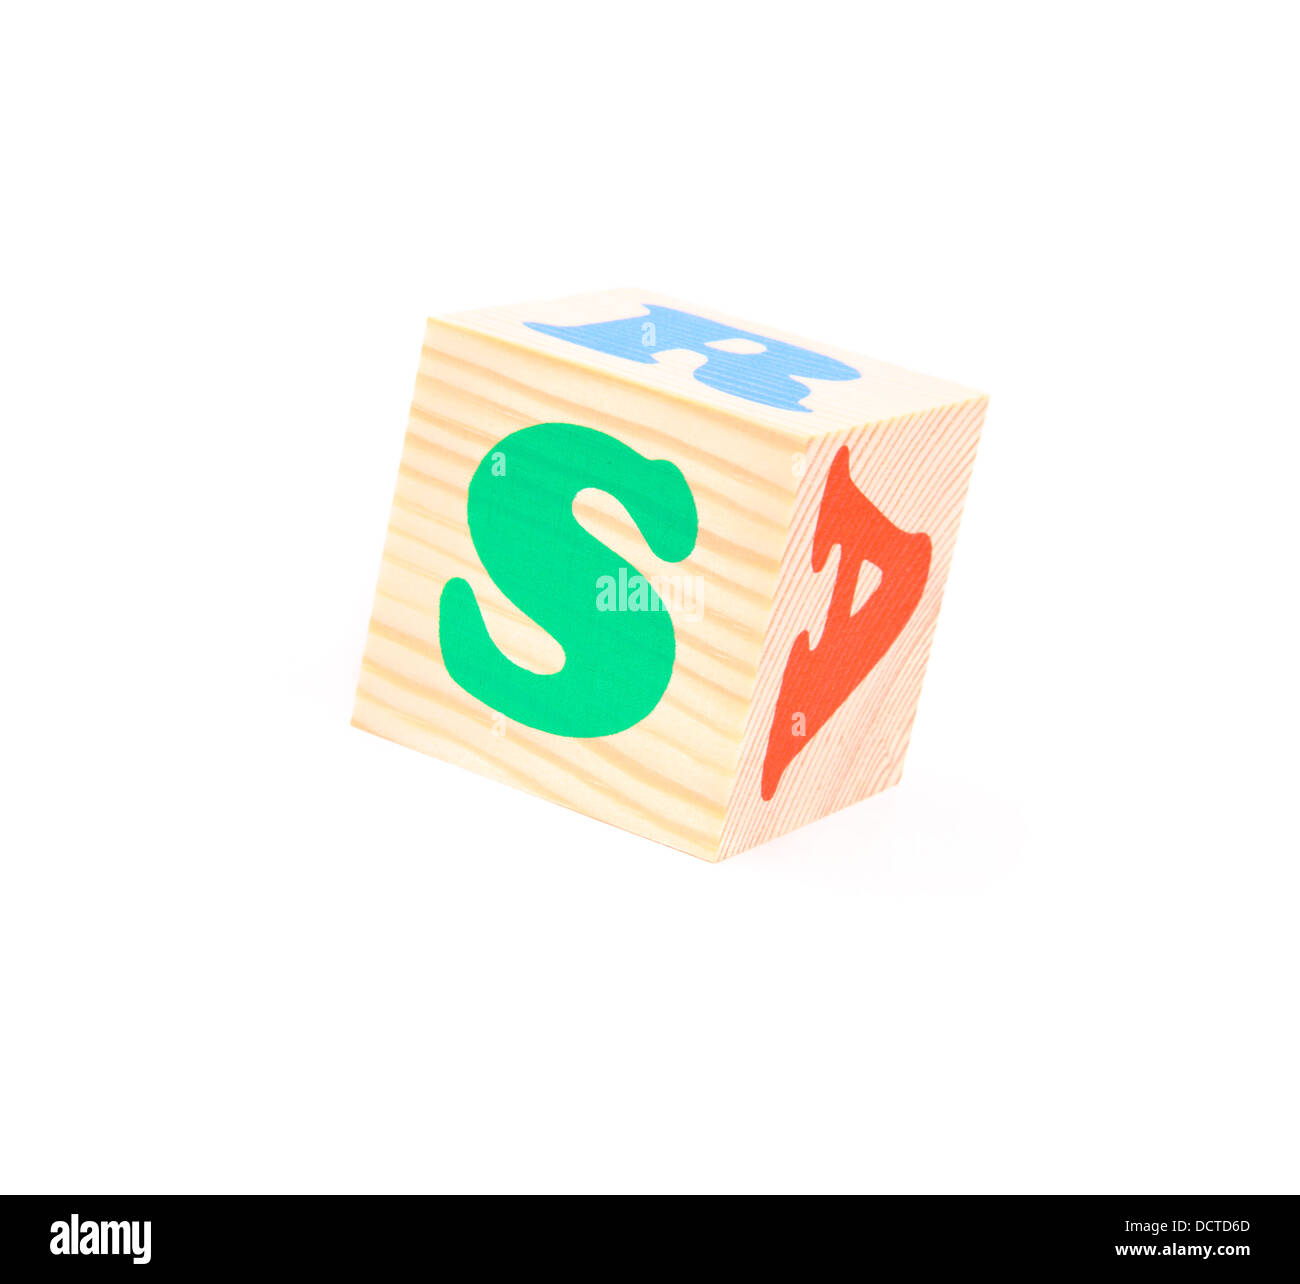 MMS abbreviation written with wood block letter toys Stock Photo - Alamy